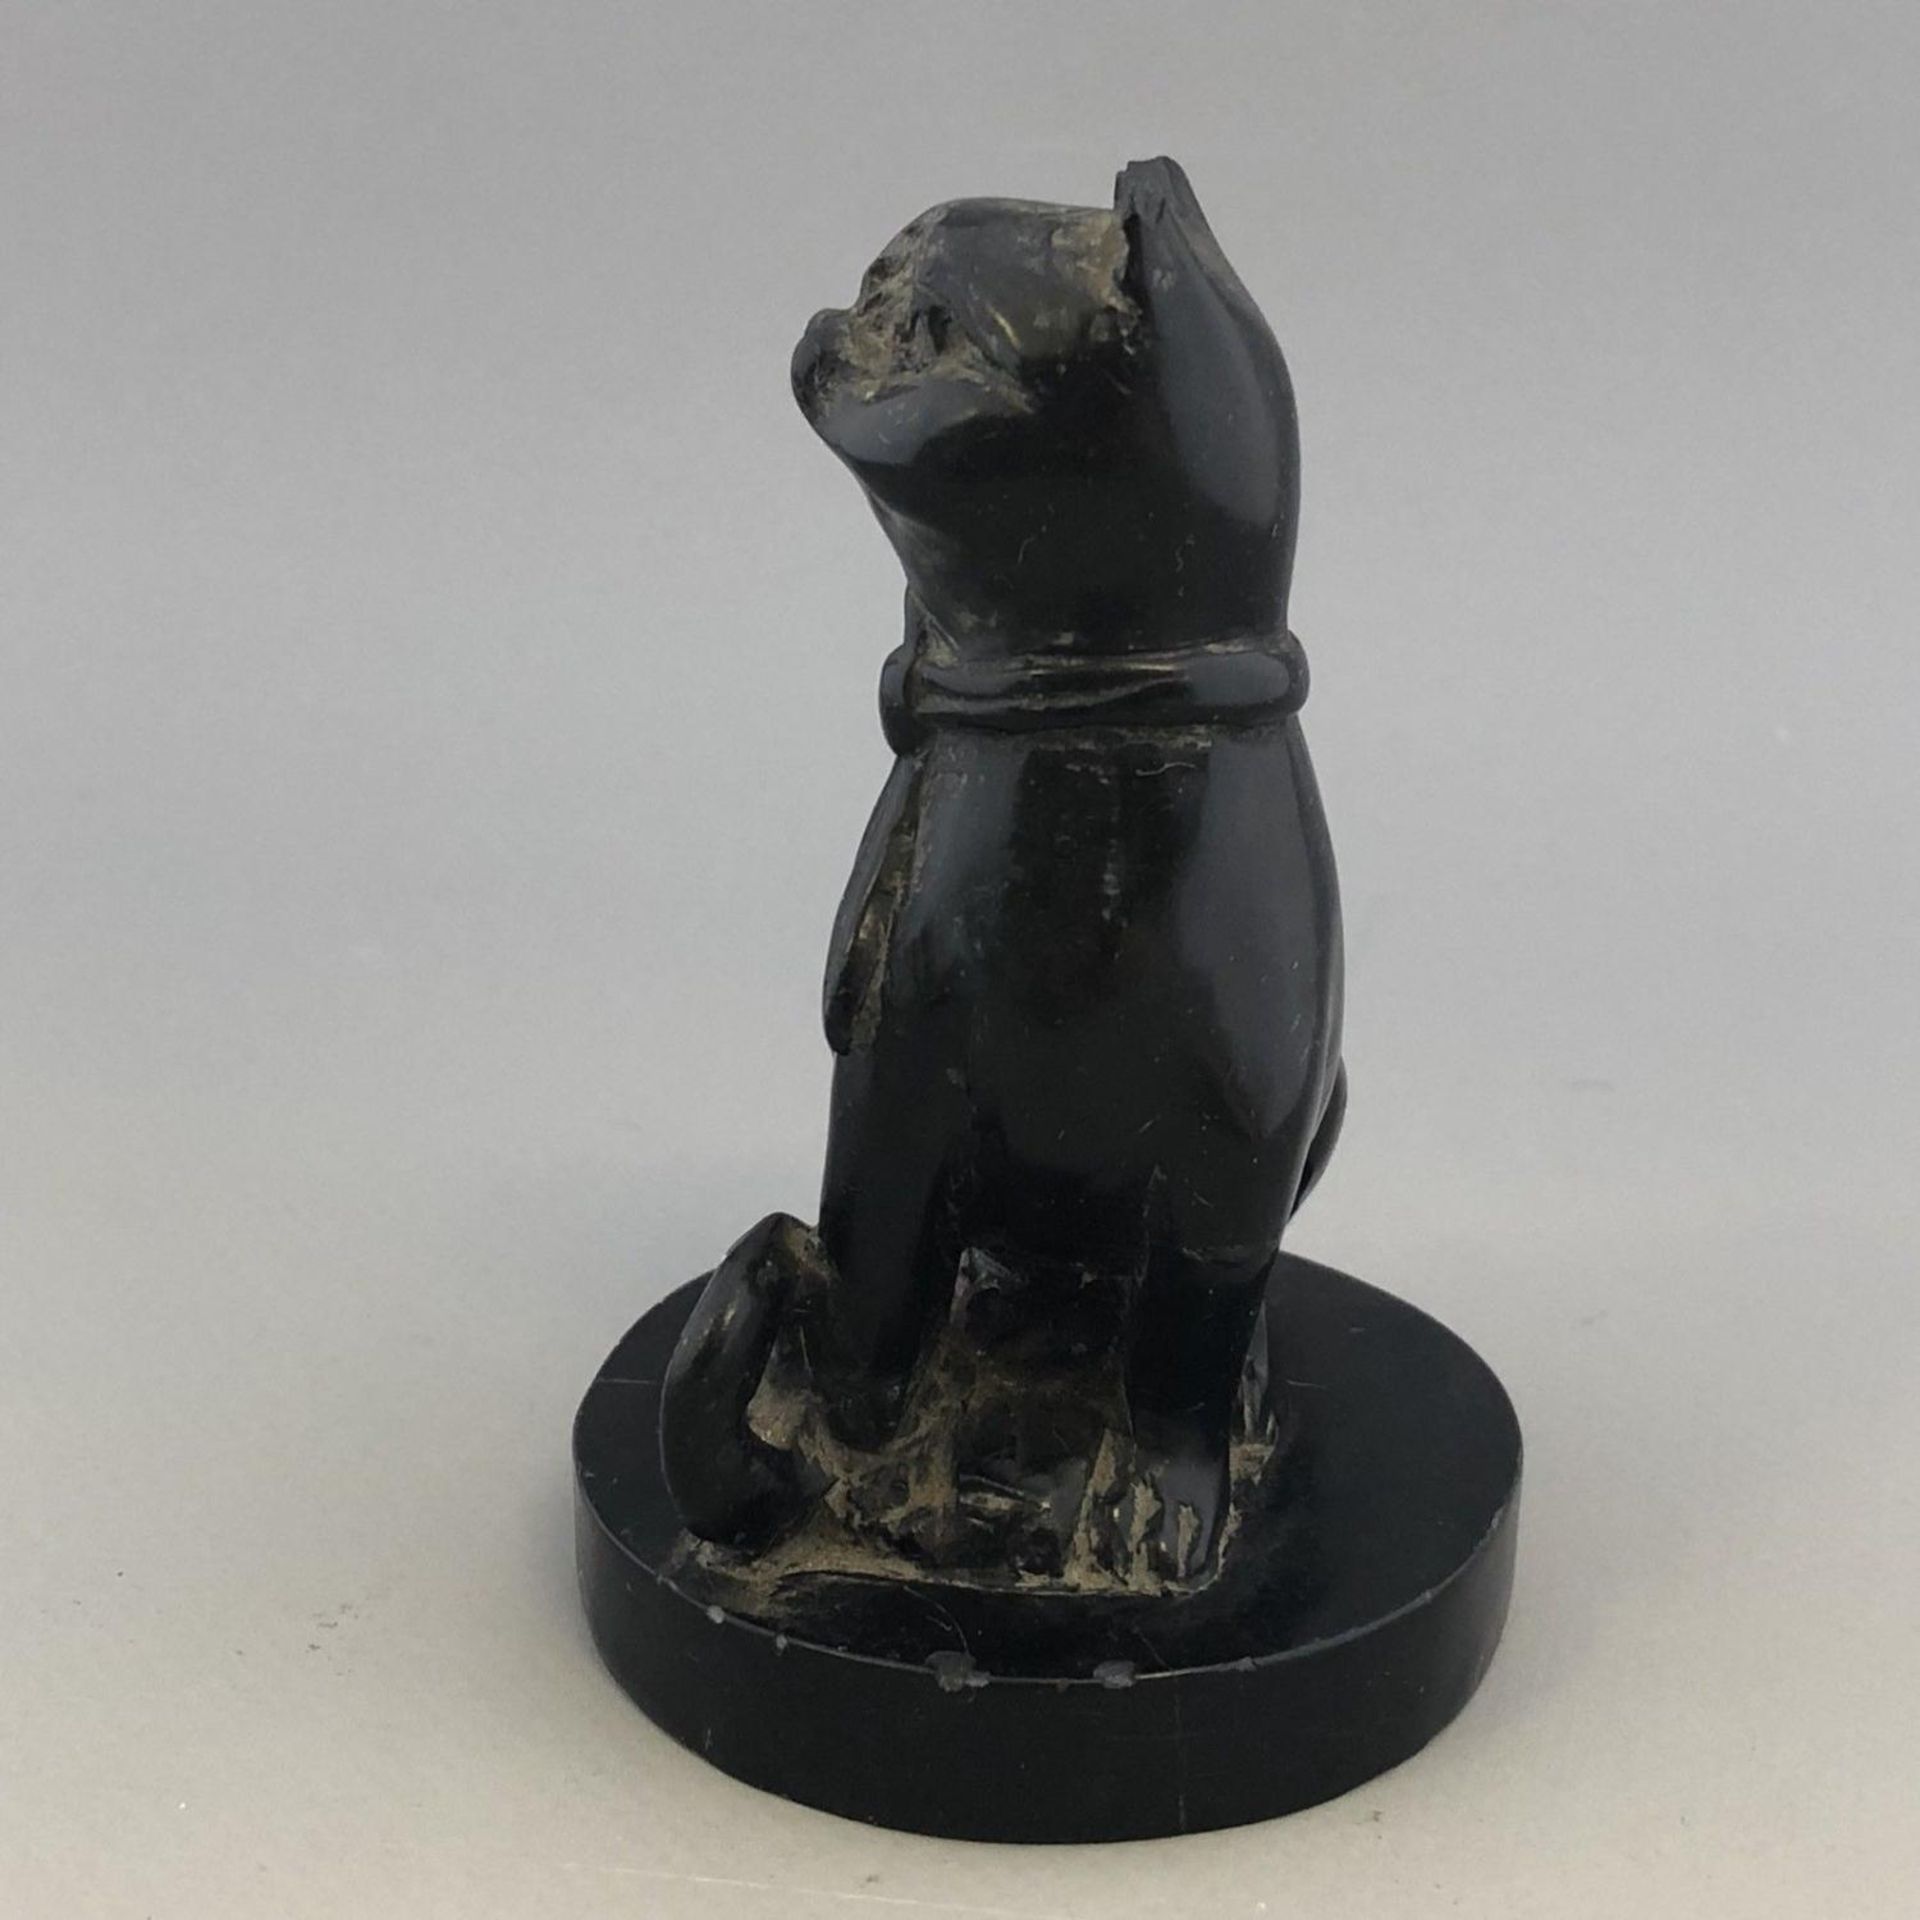 Interesting Antique carved hardstone stone figure of a lucky black cat - Japan? - Image 2 of 7